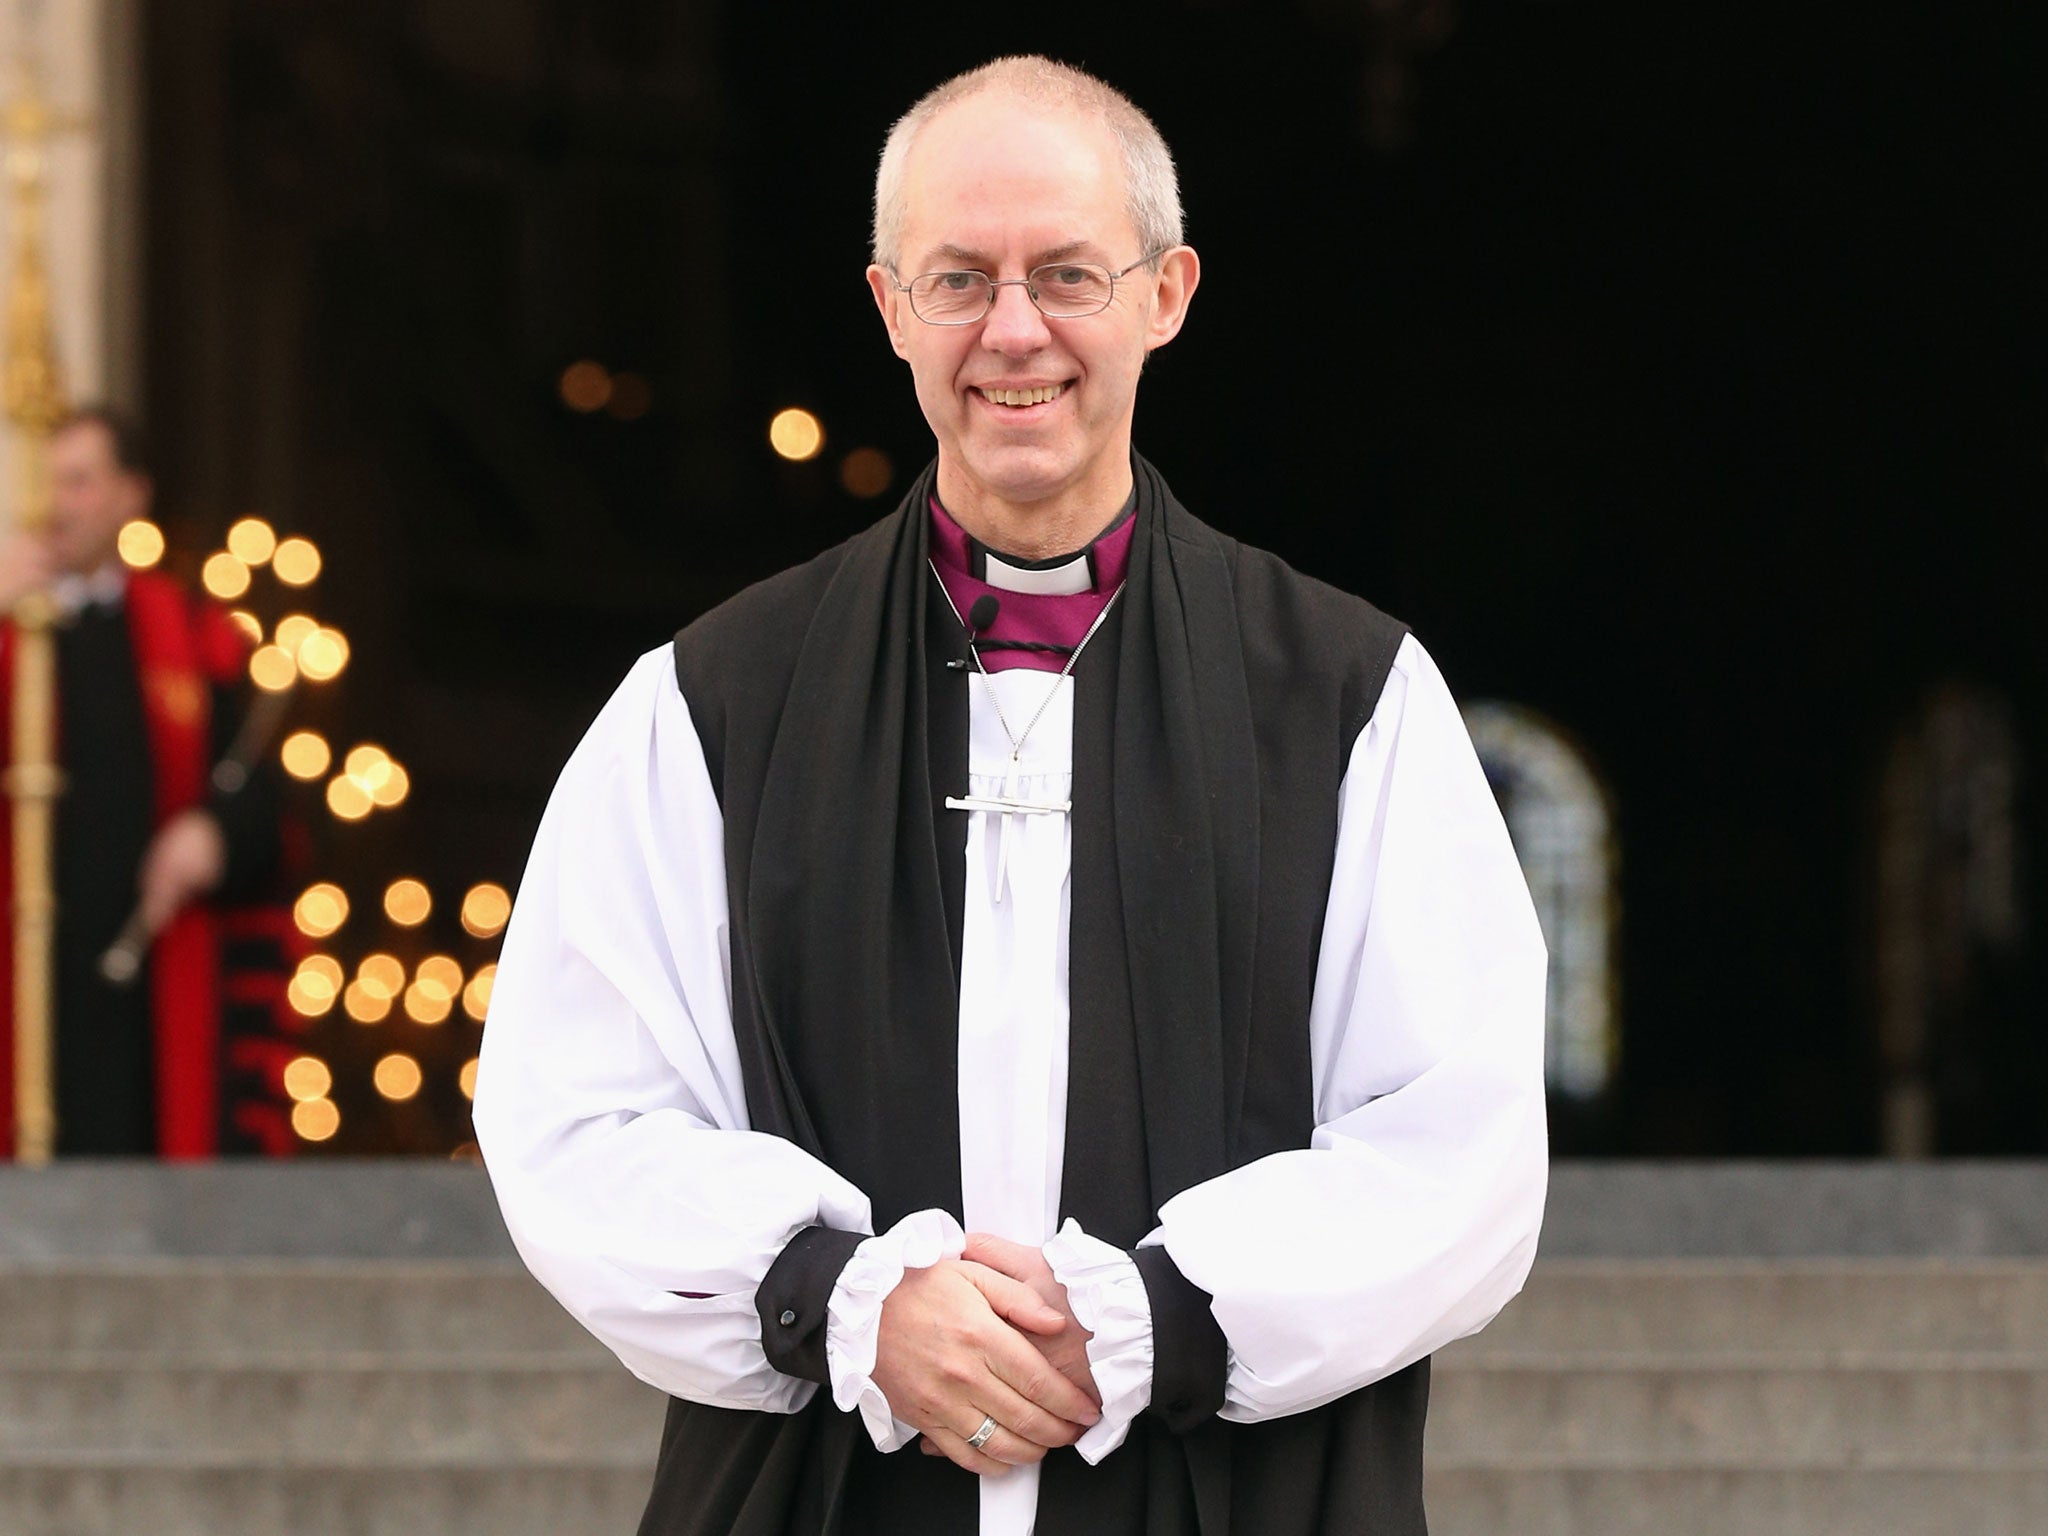 The Archbishop of Canterbury Justin Welby, announces new measures to stamp out anti-gay bullying in church schools – describing homophobia as 'absolutely anathema to Christian practice'